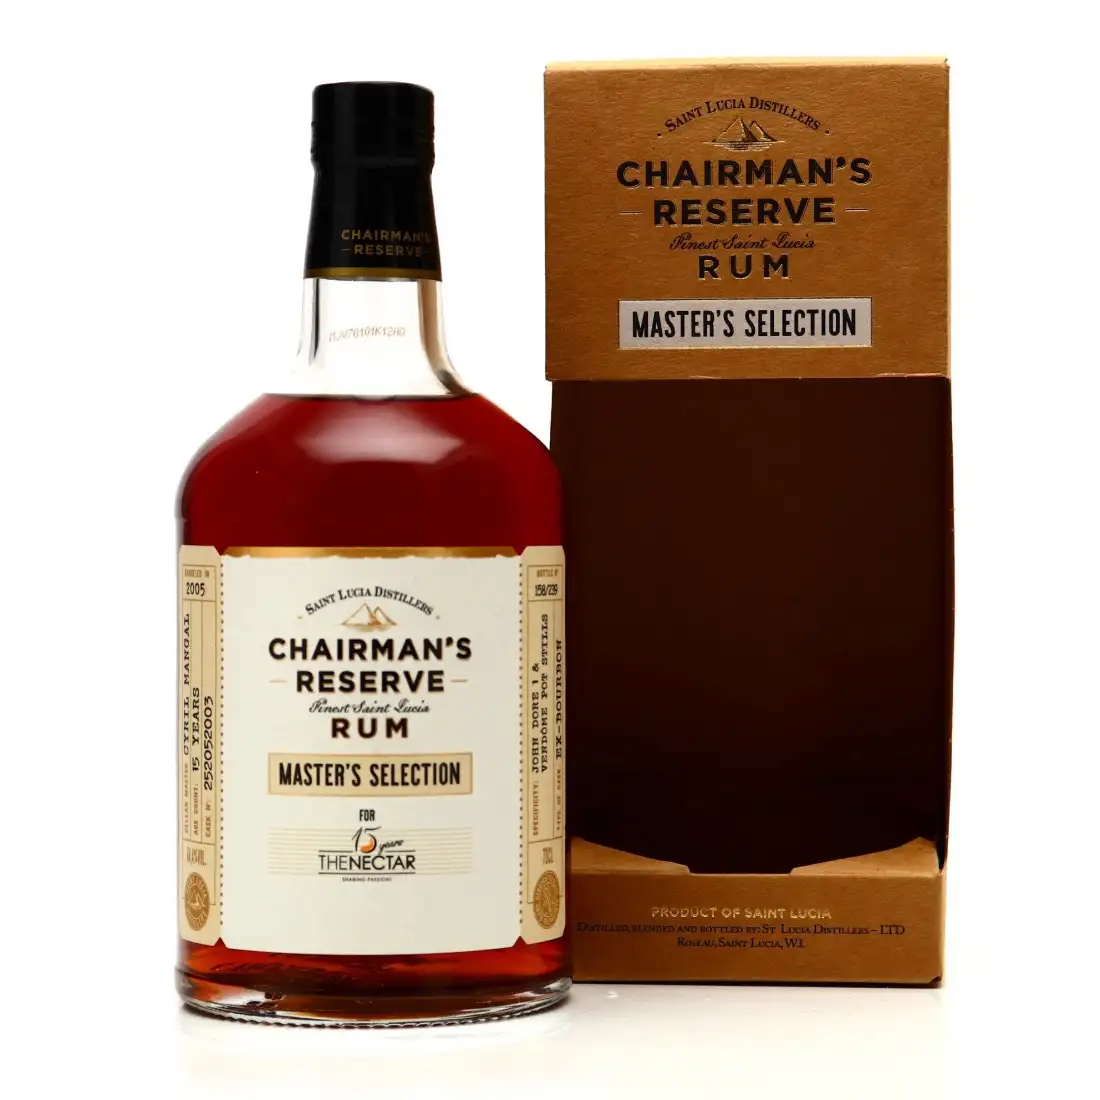 Image of the front of the bottle of the rum Chairman‘s Reserve Master's Selection (The Nectar 15th anniversary)